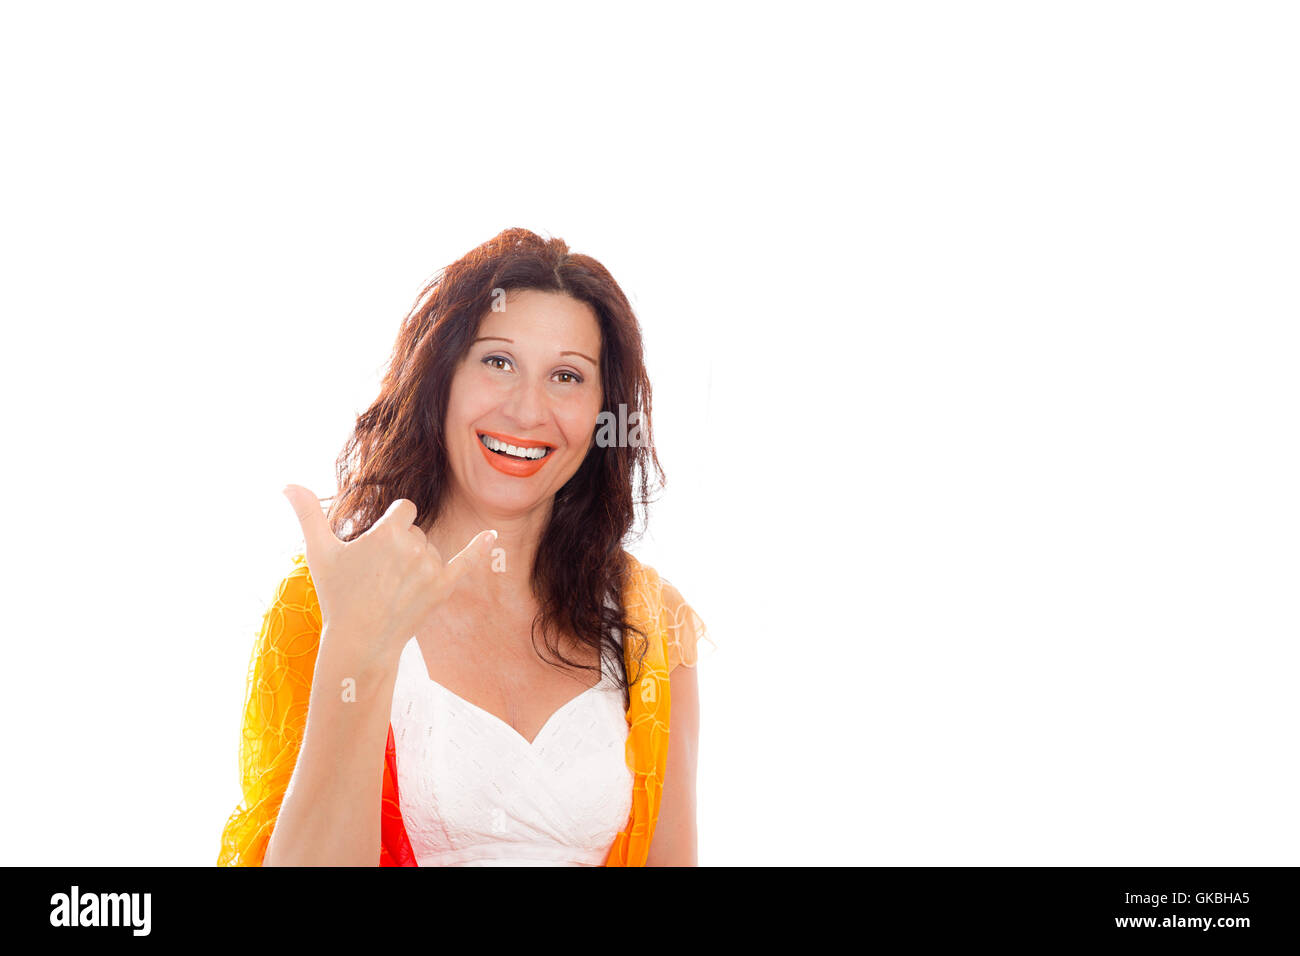 Portrait of gorgeous mature Caucasian woman with Arab and Middle Eastern features smiling and showing Hawaiian Shaka hand sign as satisfaction or welcoming greeting while wearing shawl on shoulders isolated on white background Stock Photo